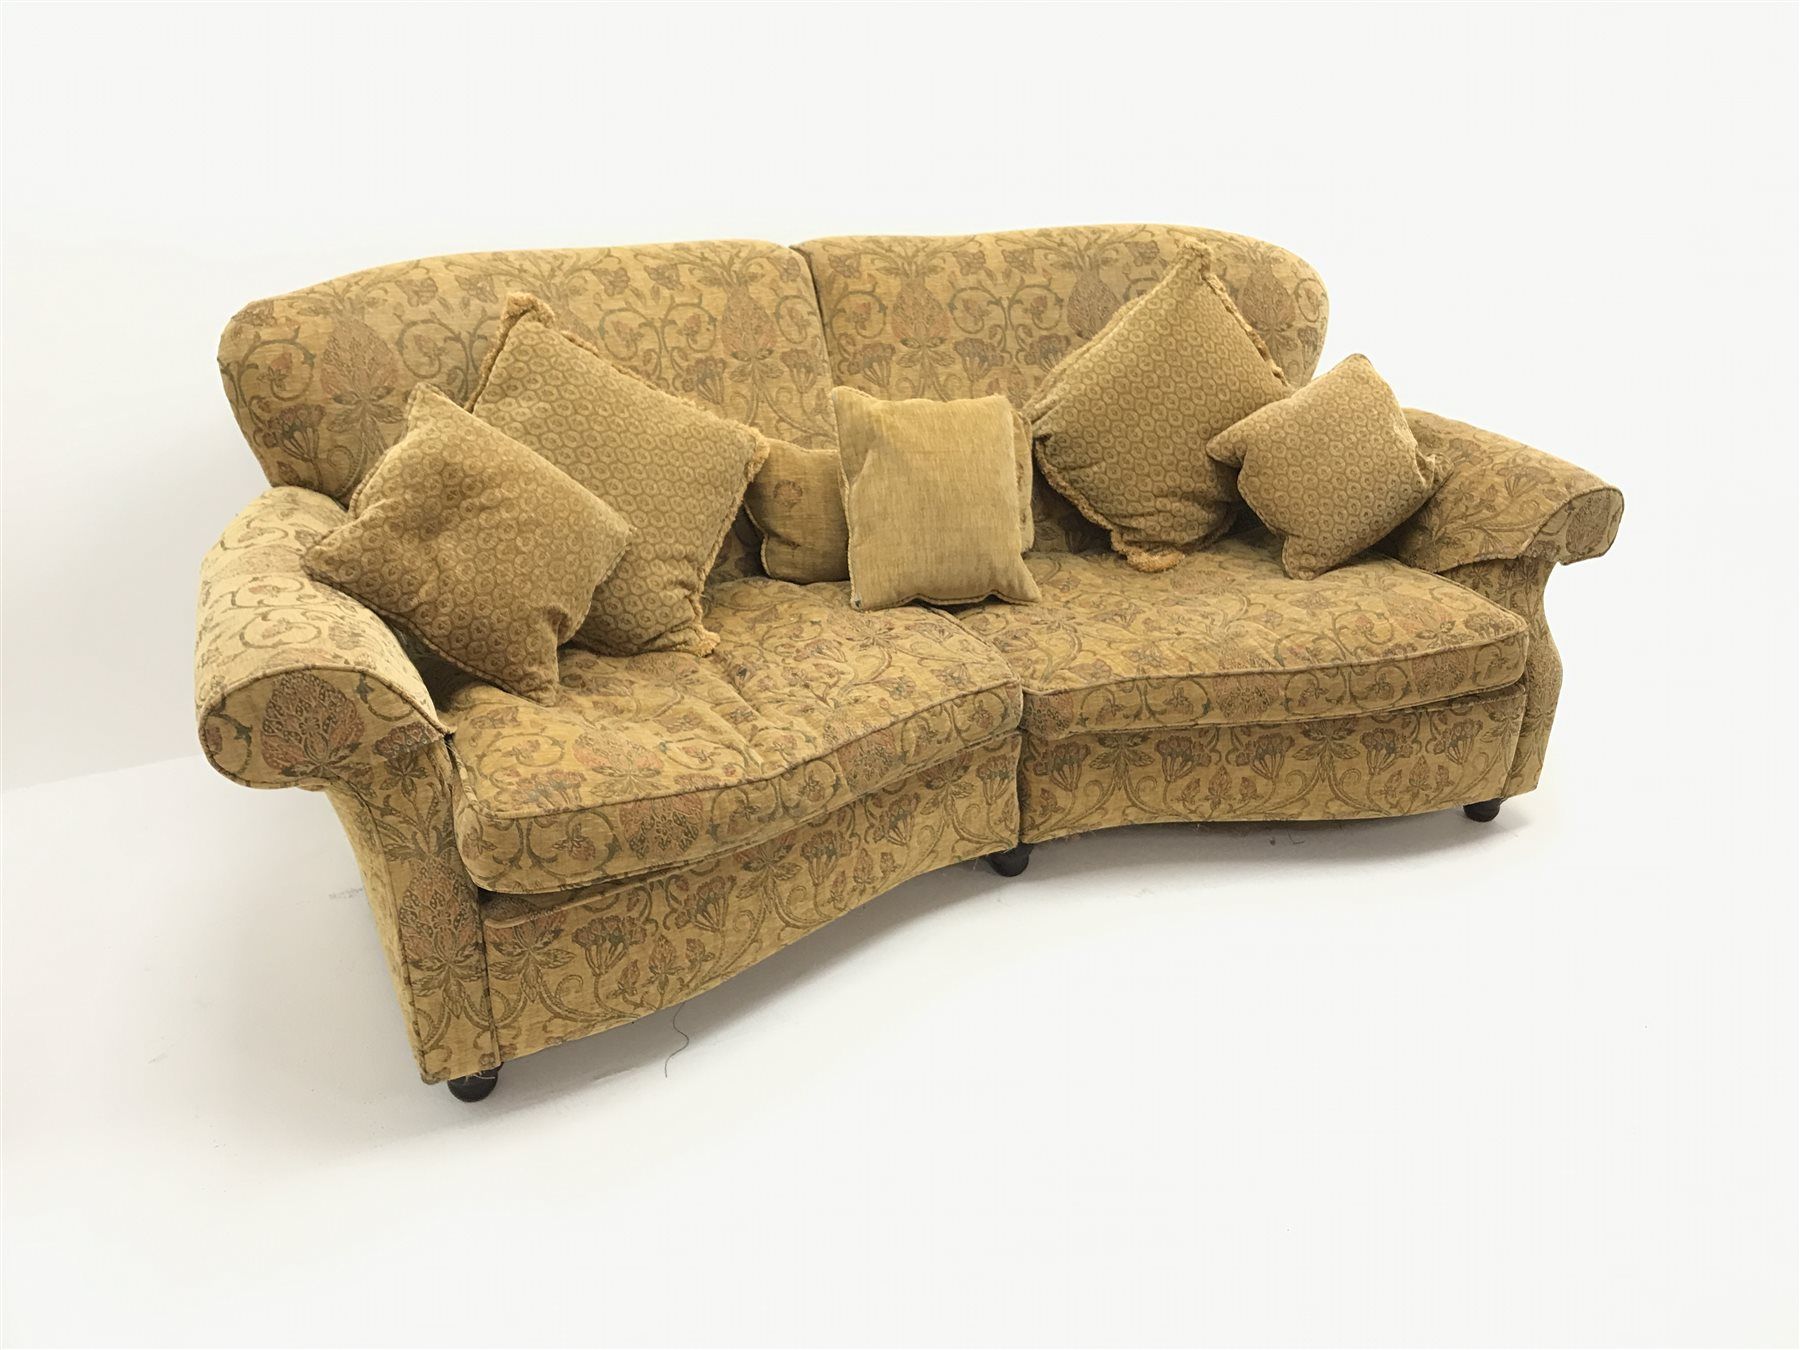 Three Seat Curved Traditional Sofa, Scrolled Arms, Upholstered In A Regarding Sofas With Curved Arms (Gallery 7 of 20)